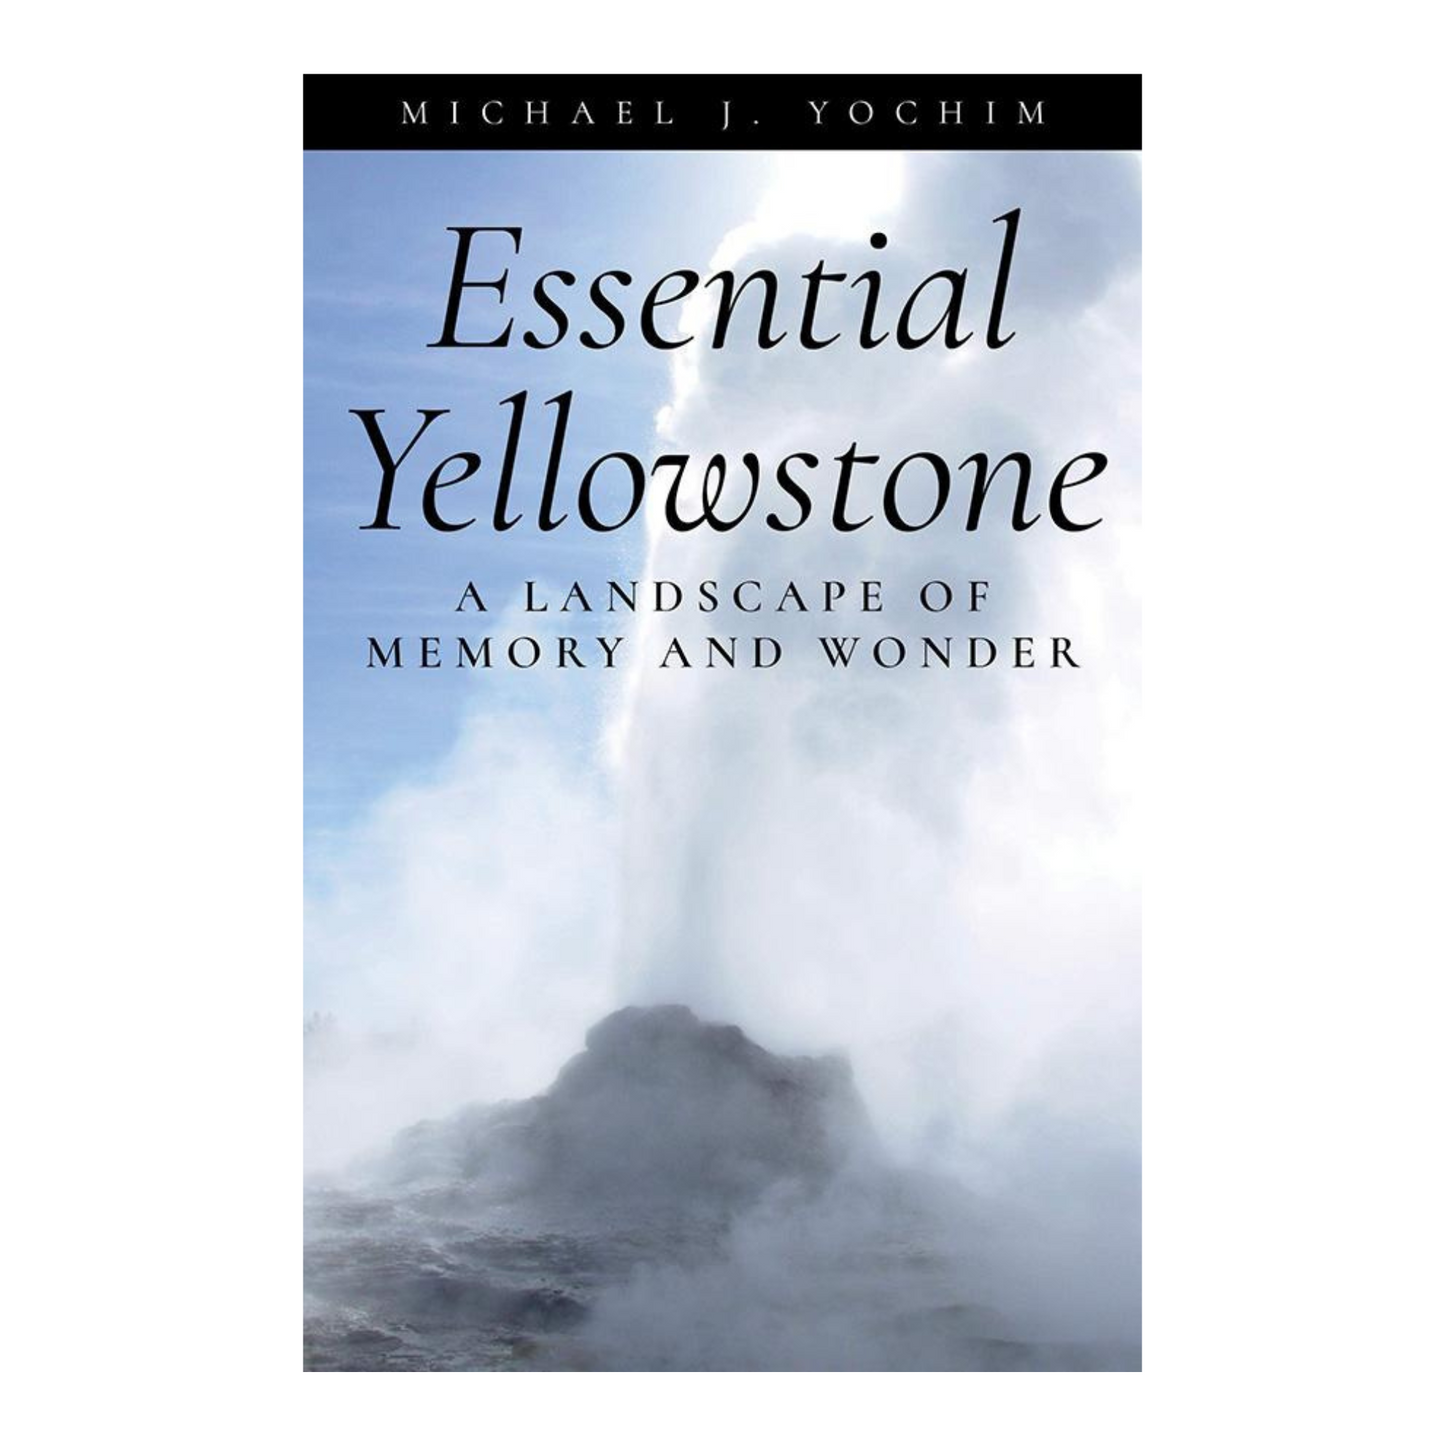 Essential Yellowstone: A Landscape of Memory and Wonder